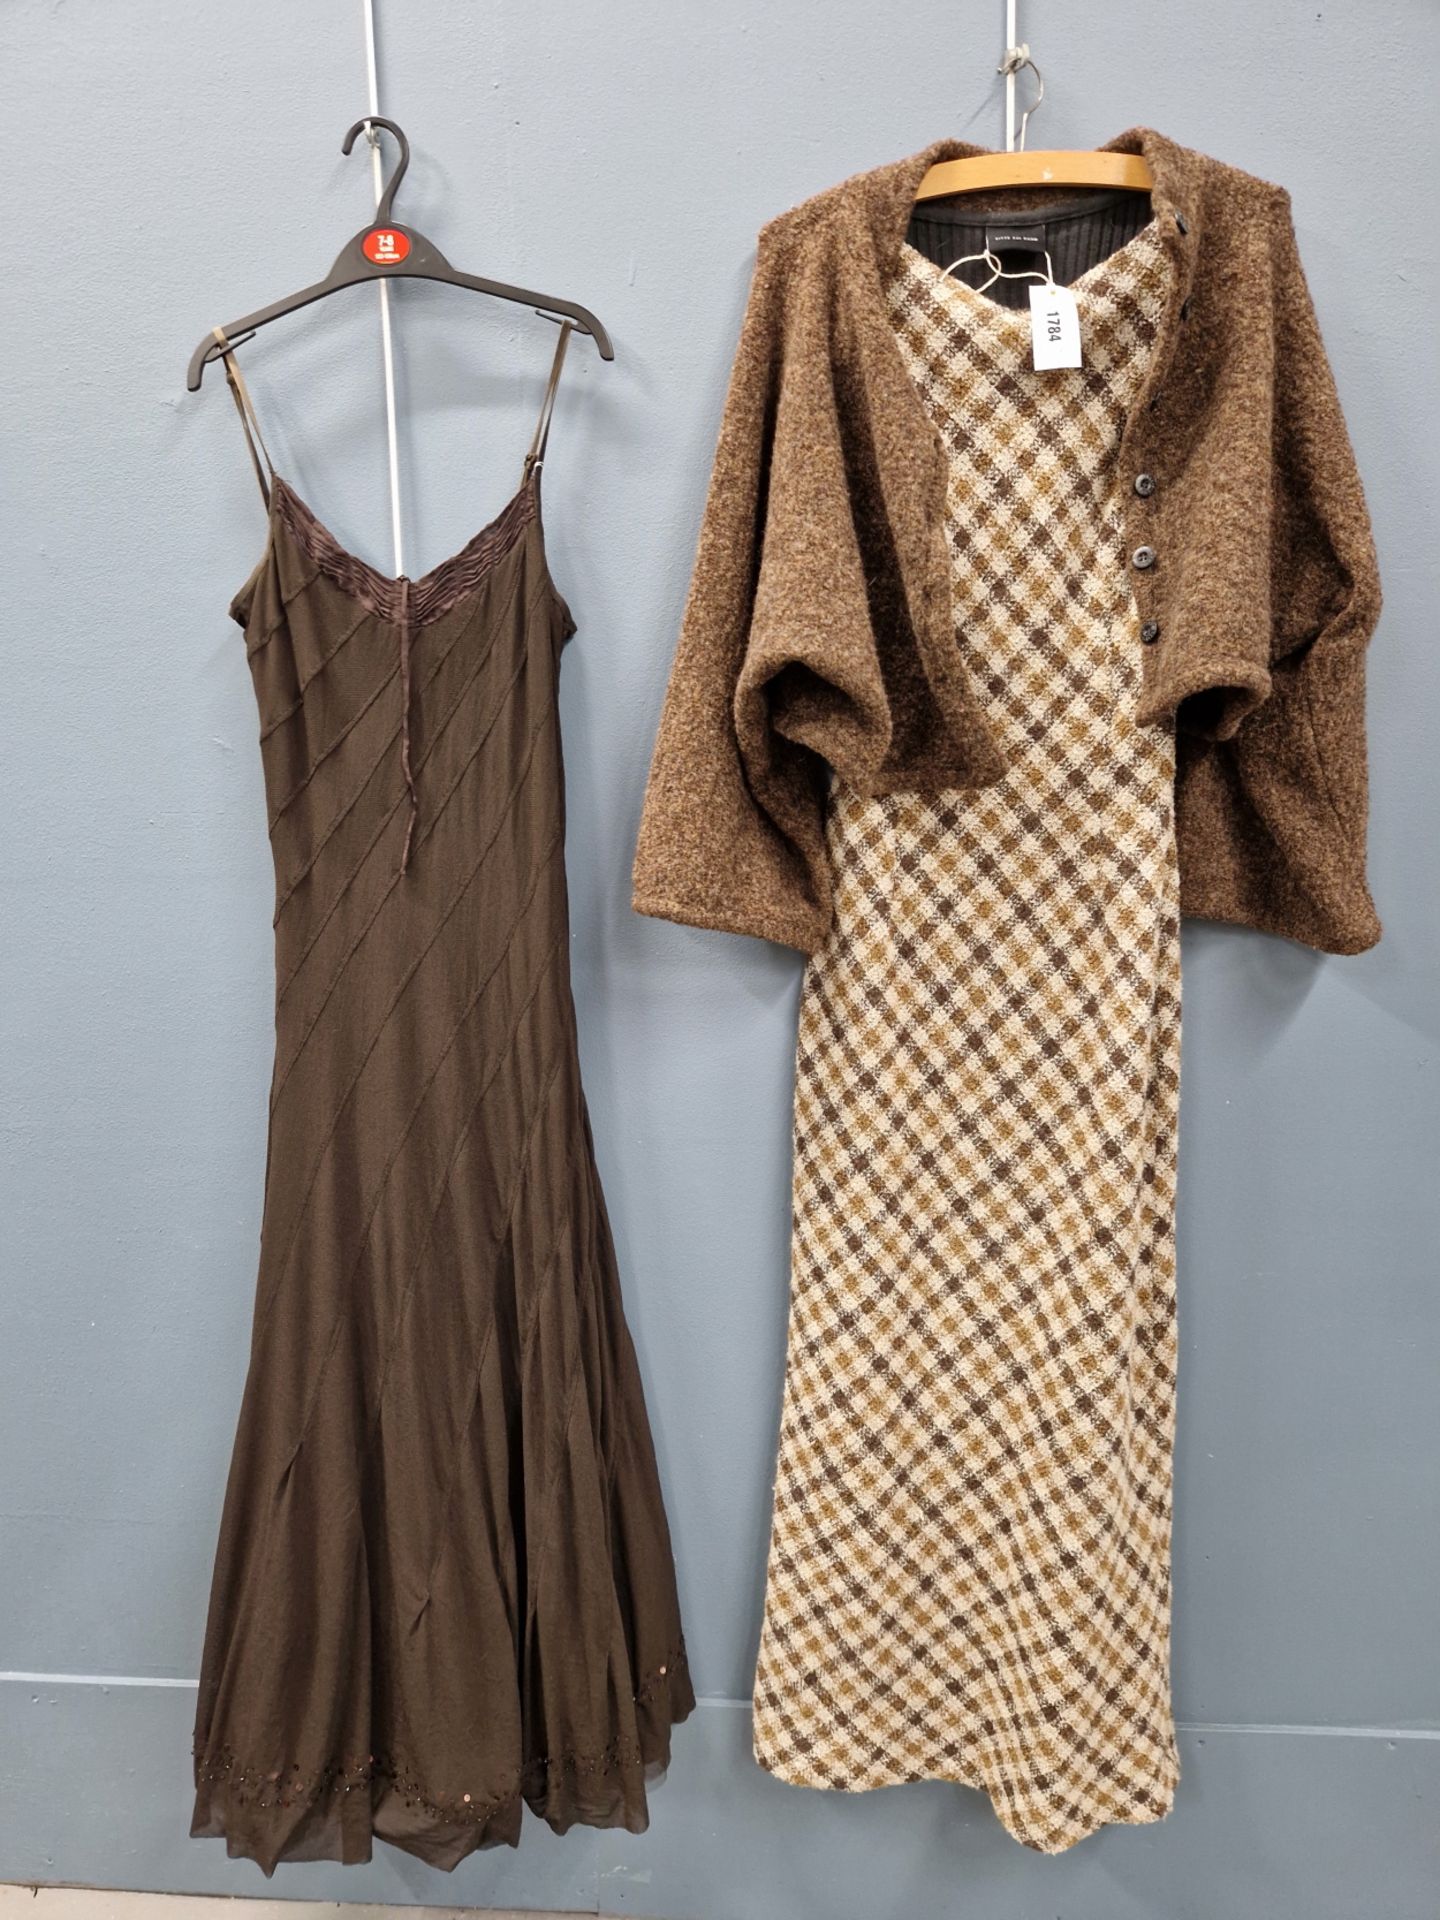 A BITTE KAI RAND BROWN CHECK FULL LENGTH DRESS AND CARDIGAN SUITE, AND A FULL LENGTH BROWN TULLE